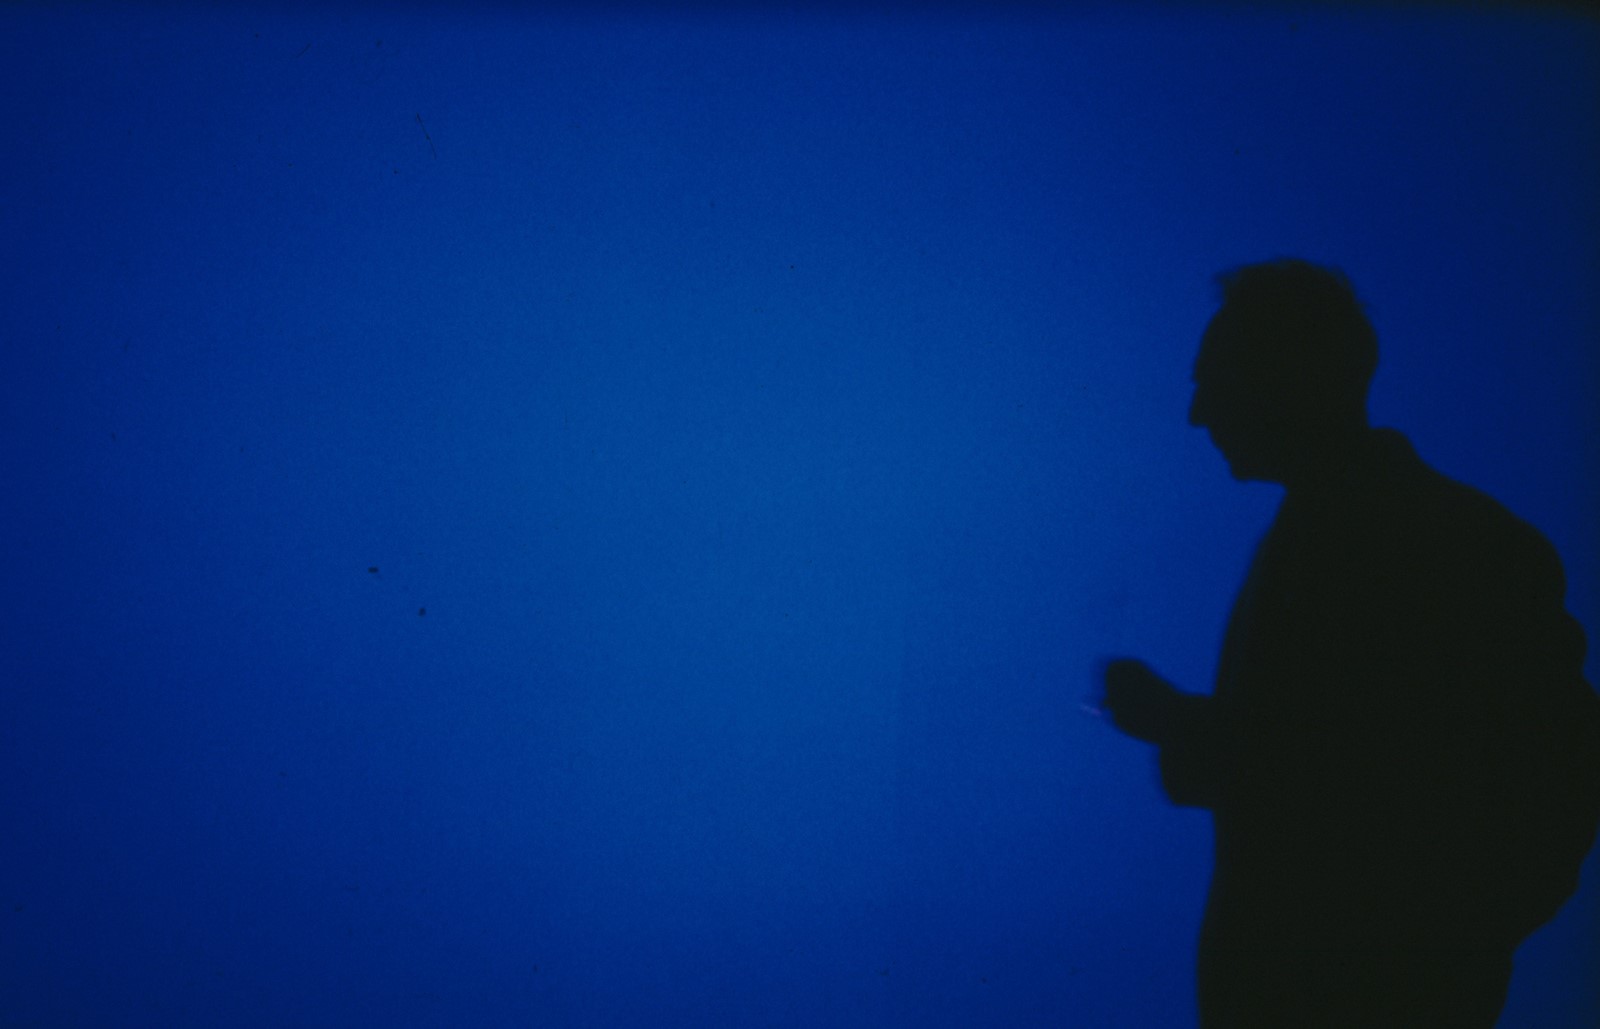 19. Blue, 1993, Film still, Digital Prores with so